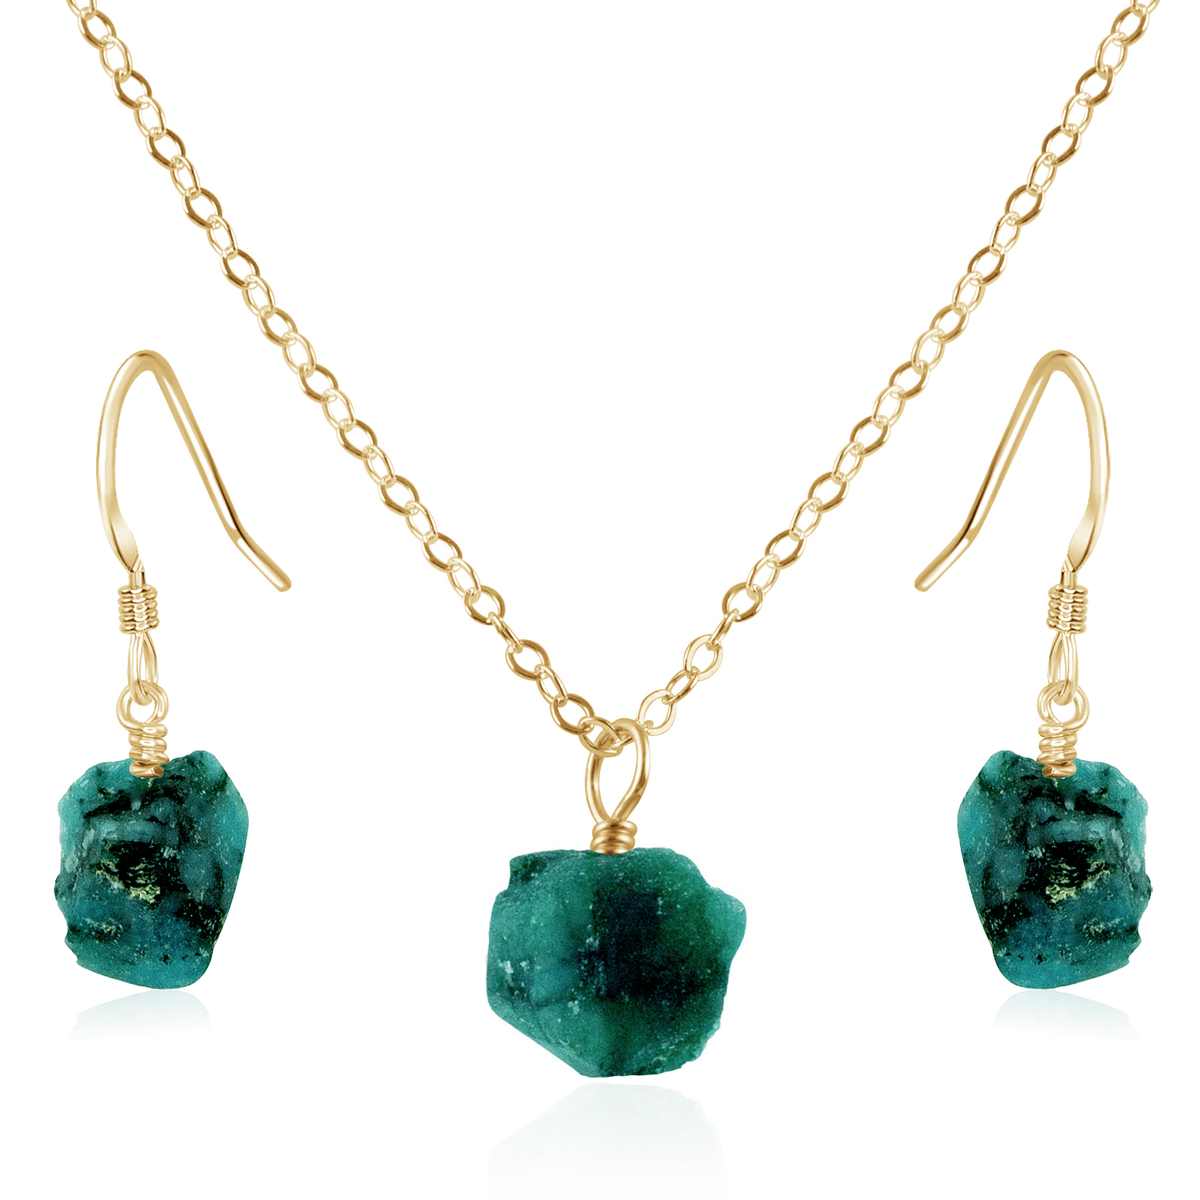 Raw Emerald Crystal Earrings & Necklace Set - Raw Emerald Crystal Earrings & Necklace Set - 14k Gold Fill / Cable - Luna Tide Handmade Crystal Jewellery